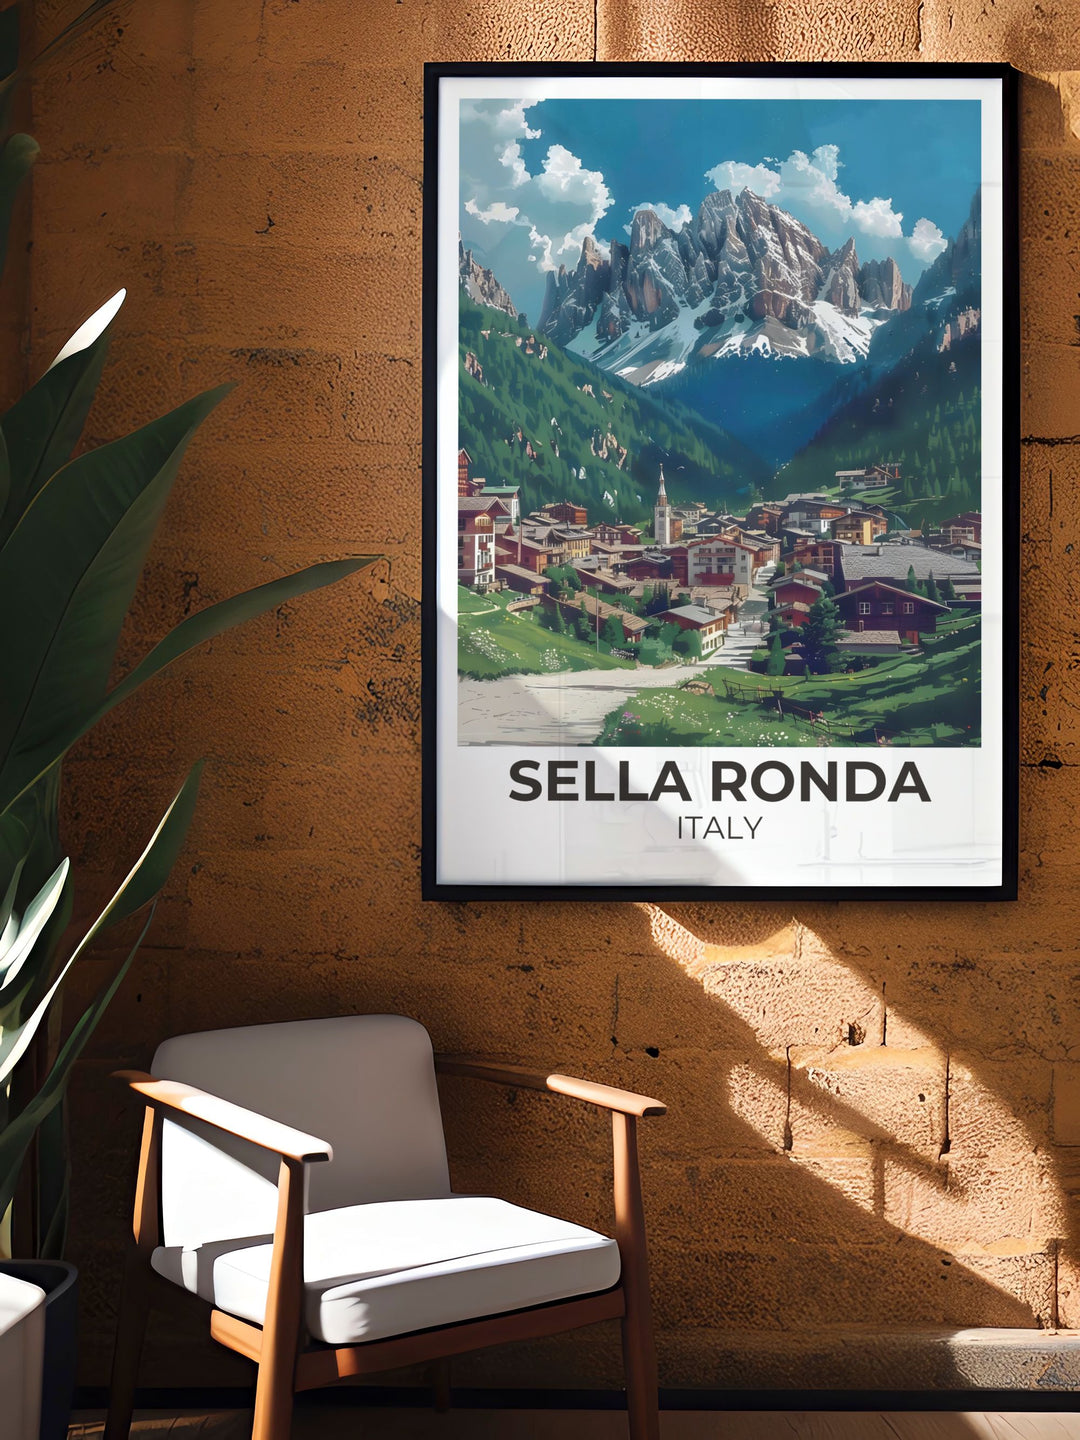 Elegant Corvara Home Decor featuring the Dolomites, bringing the thrill and beauty of the Italian Alps into your living space.